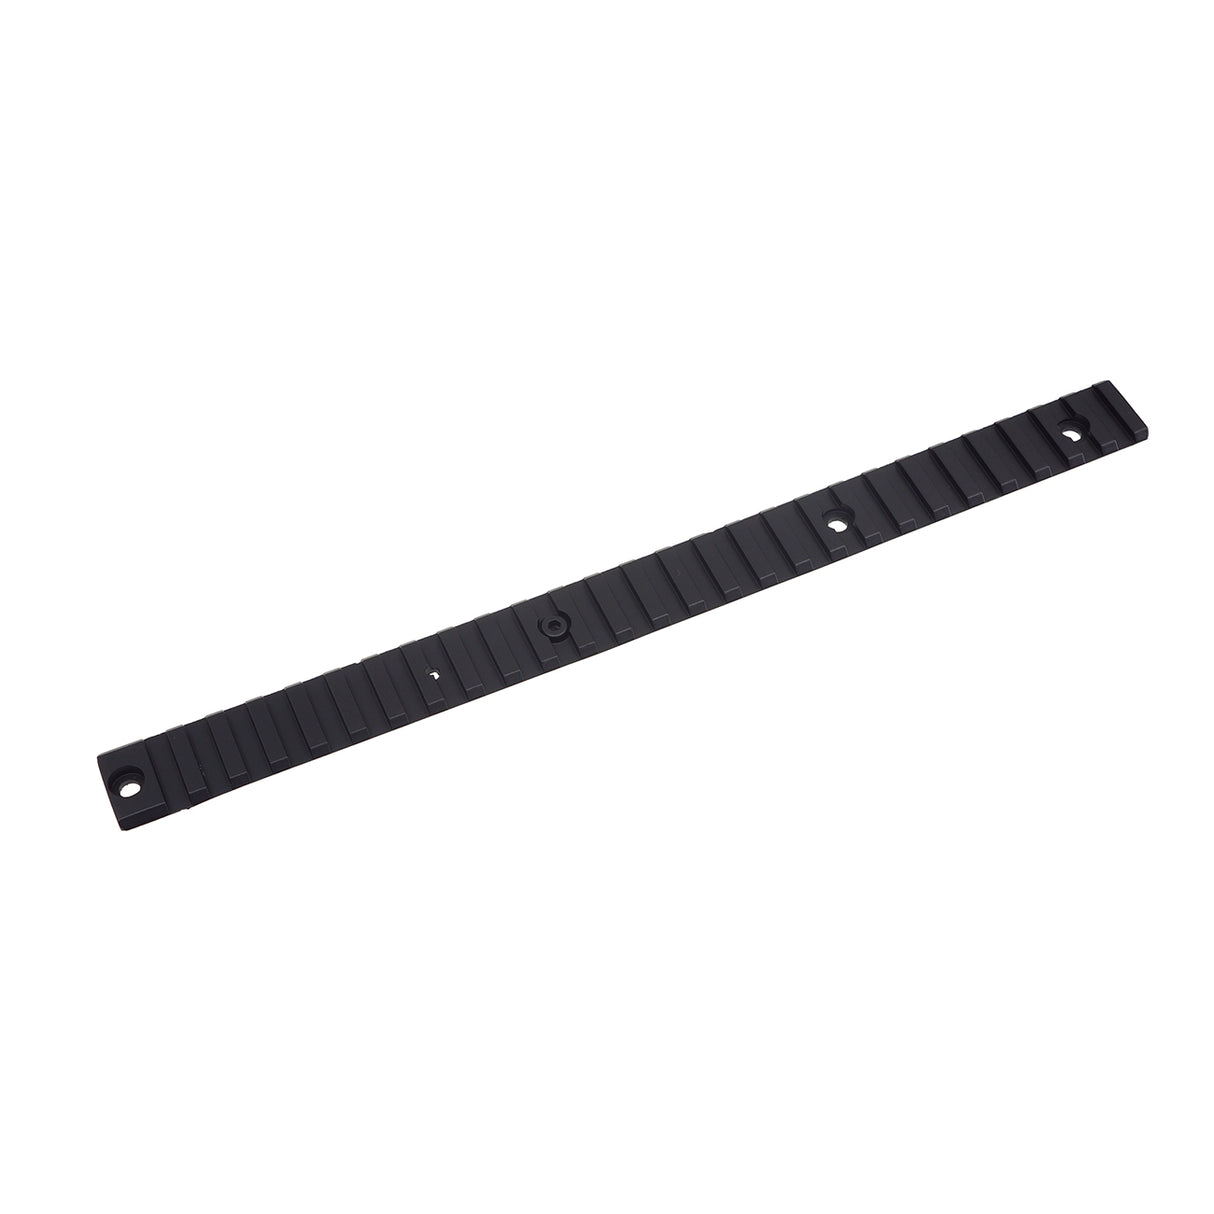 WELL Replacement Top Rail for R4 MP7 AEG ( WELL-AC040 )